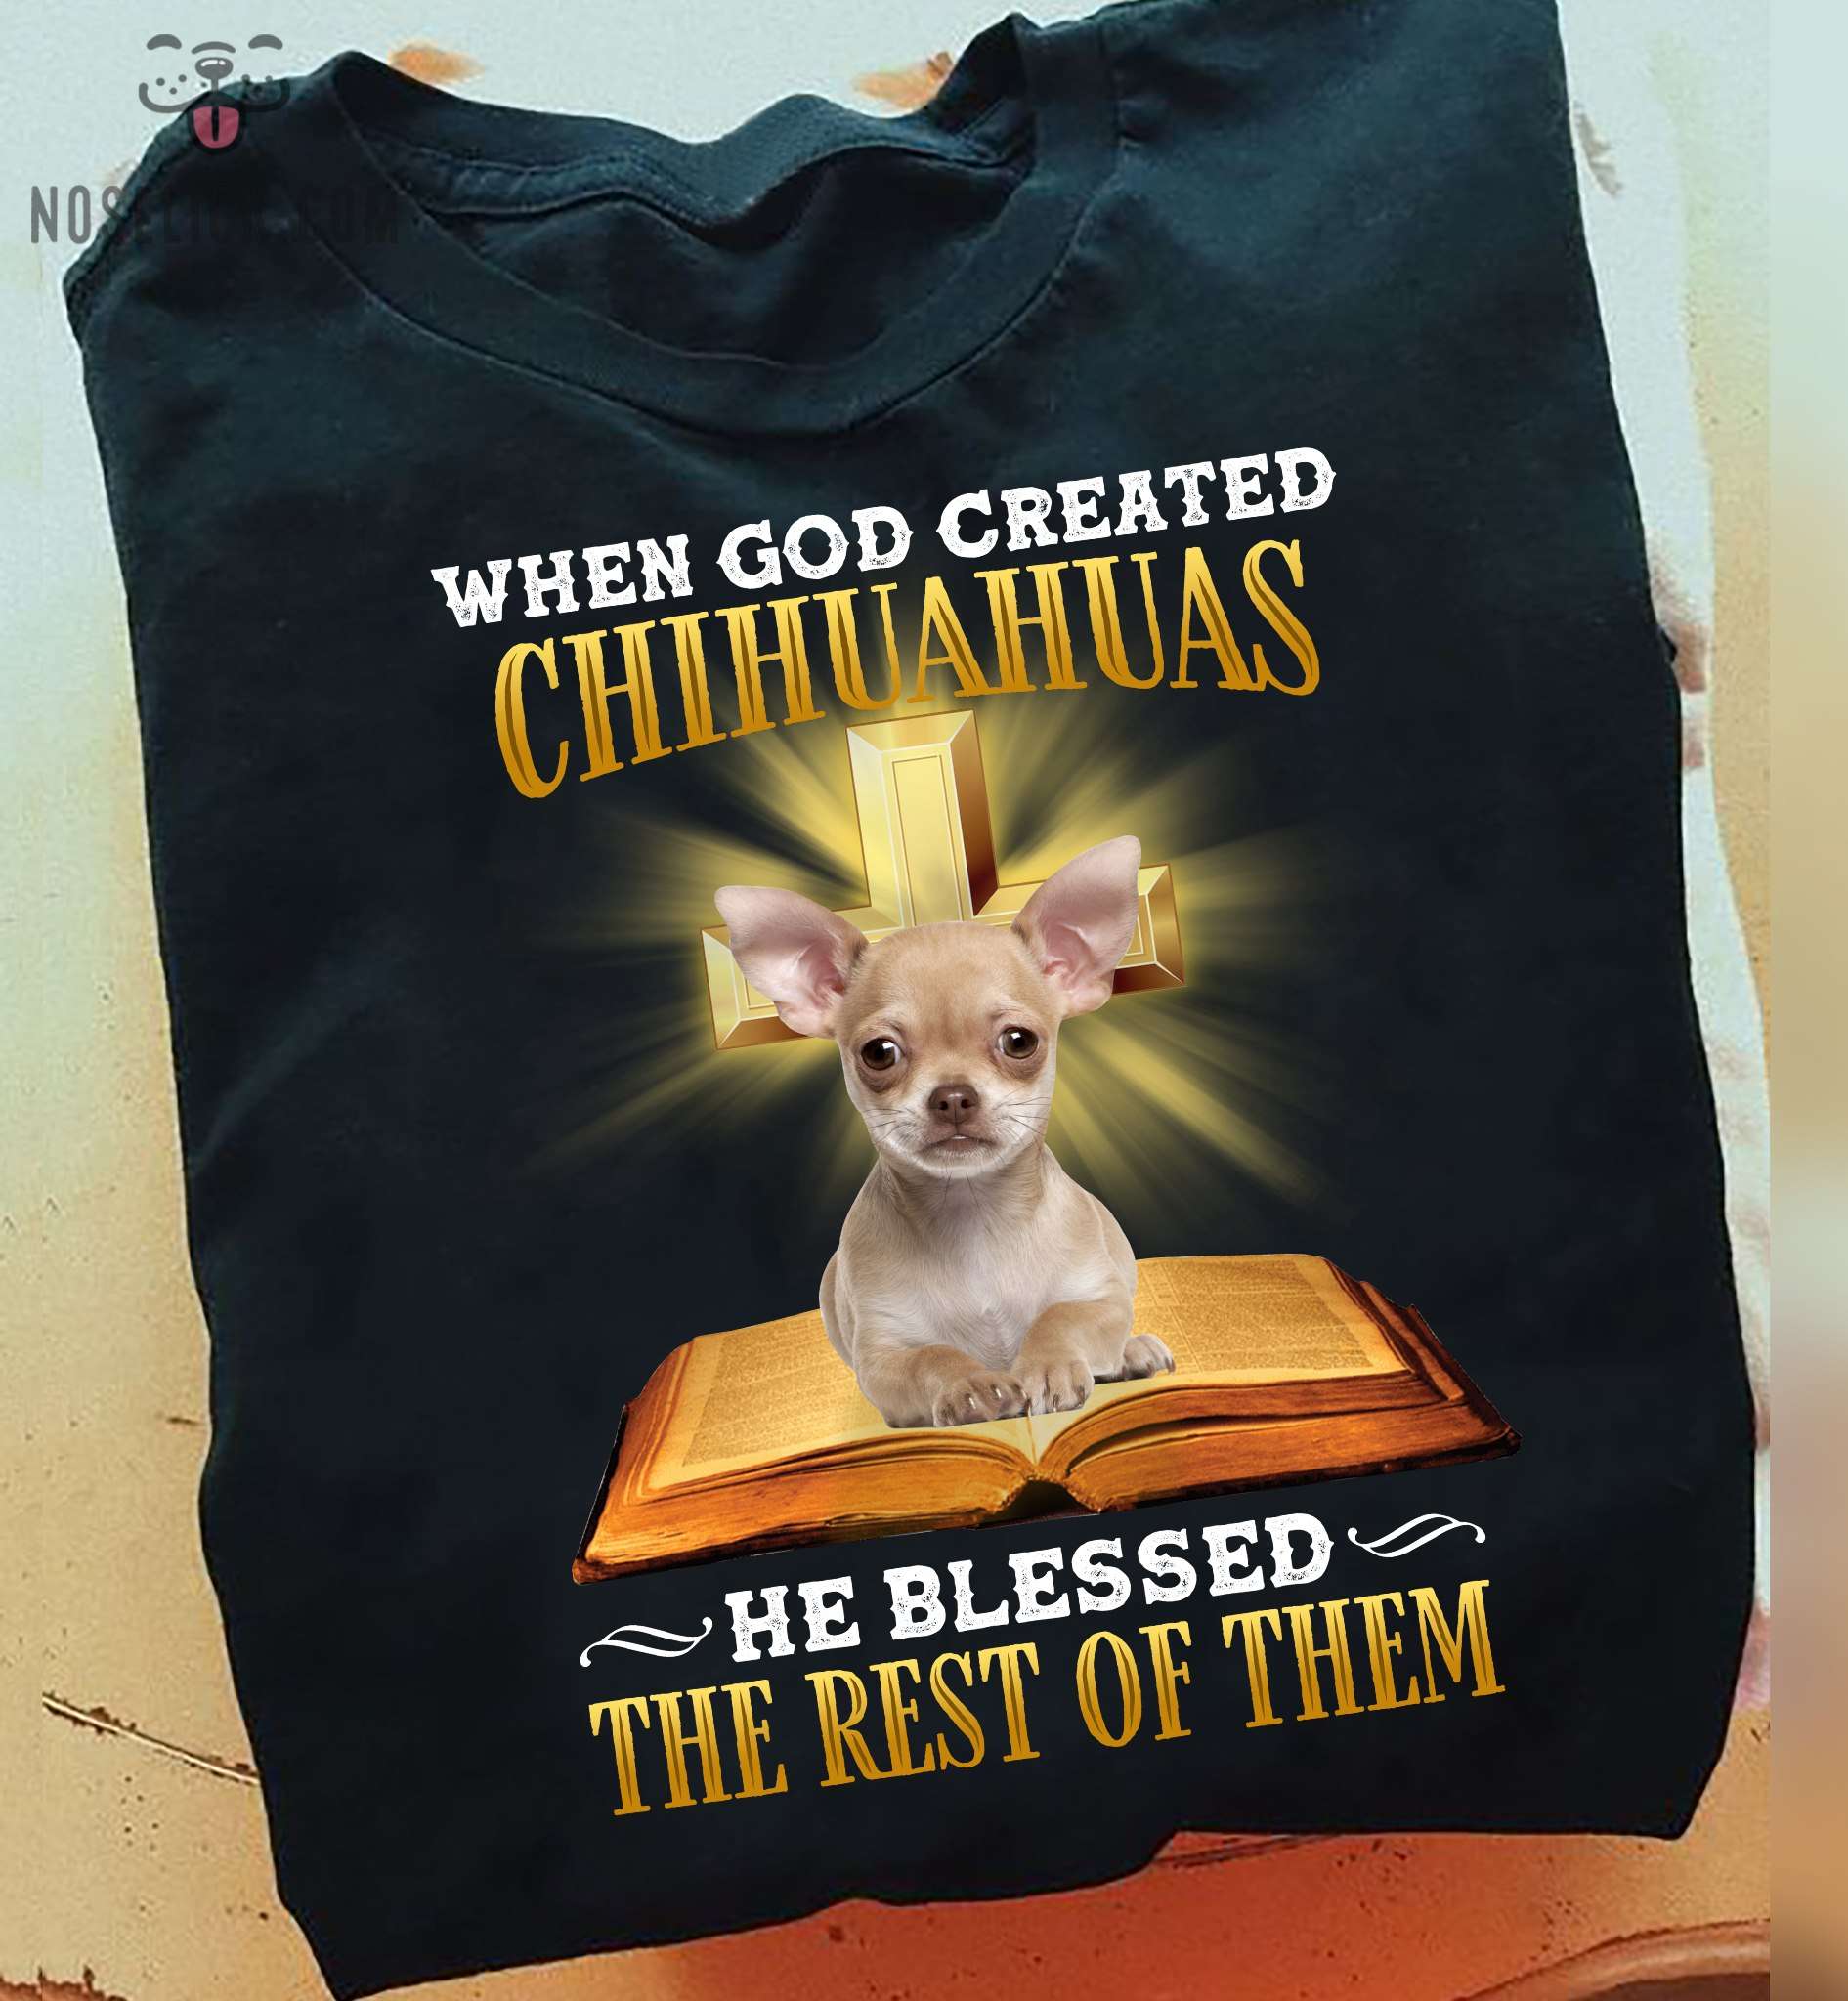 Chihuahua God Bible - When god created chihuahuas he blessed the rest of them